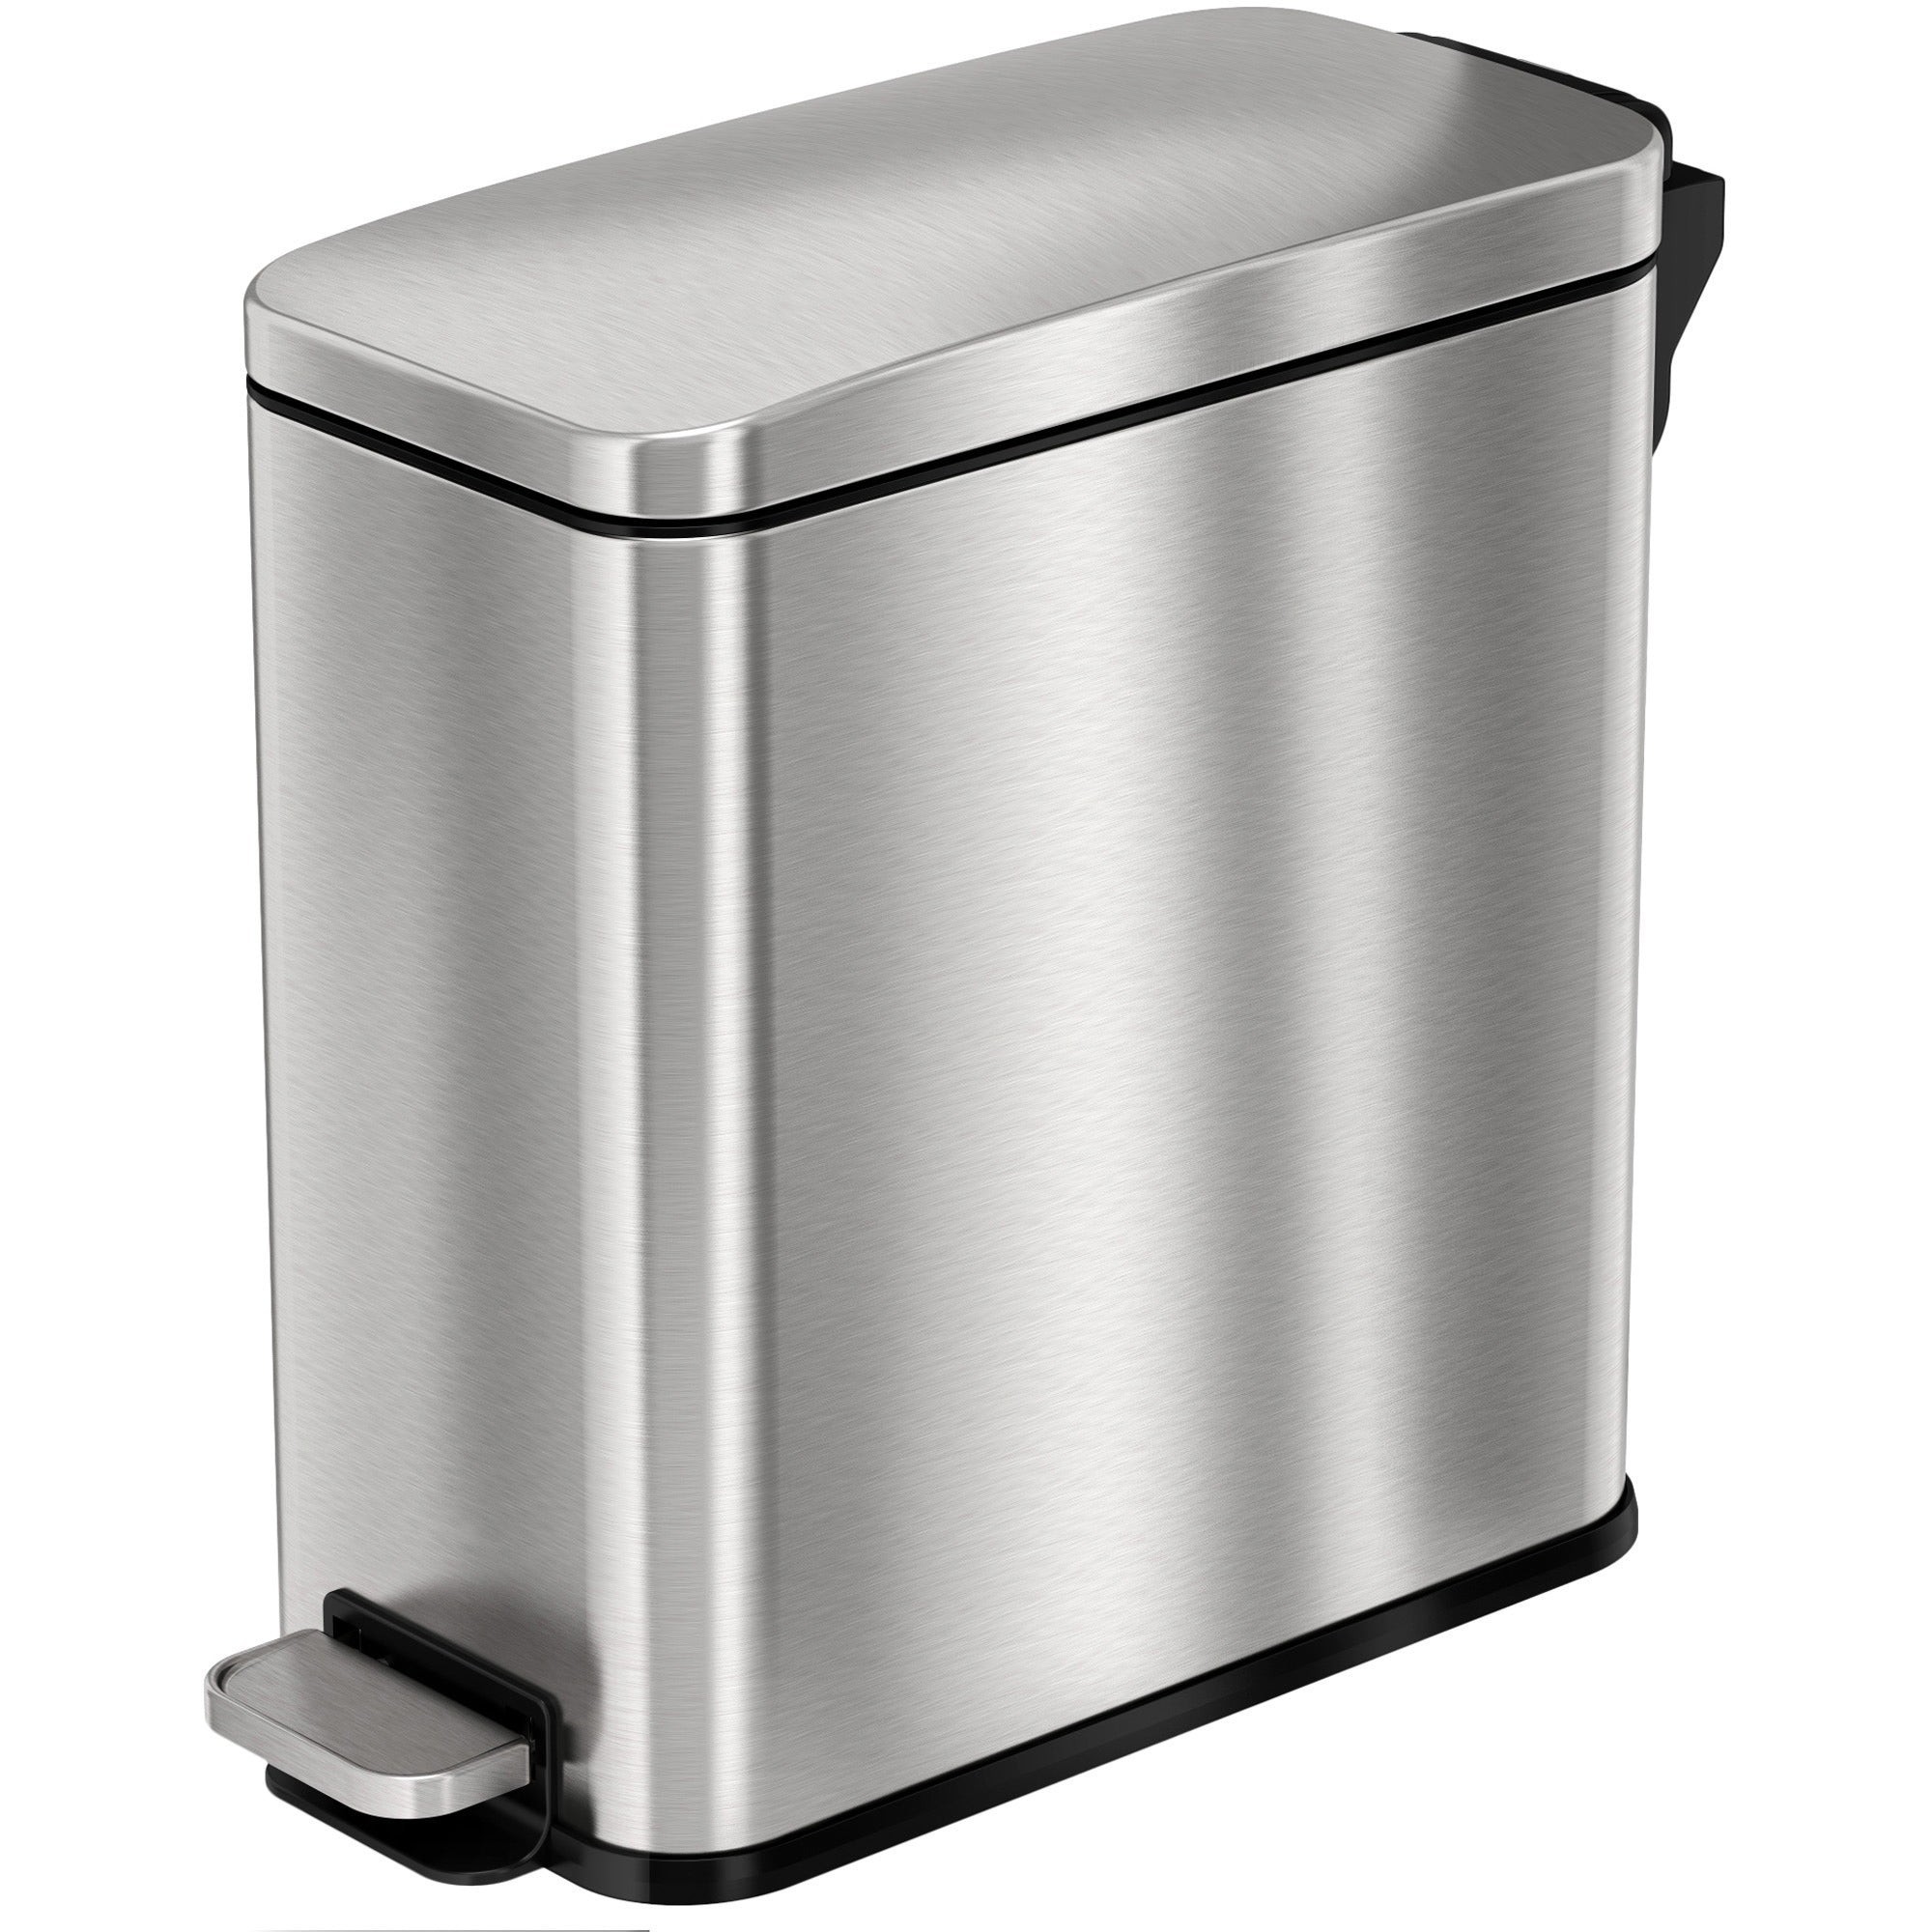 hls-commercial-fire-rated-soft-step-trash-can-3-gal-capacity-pedal-control-durable-smooth-lid-closure-fingerprint-proof-fire-retardant-removable-inner-bin-handle-138-height-x-65-width-stainless-steel-silver-1-each_hlchlss03rfr - 1